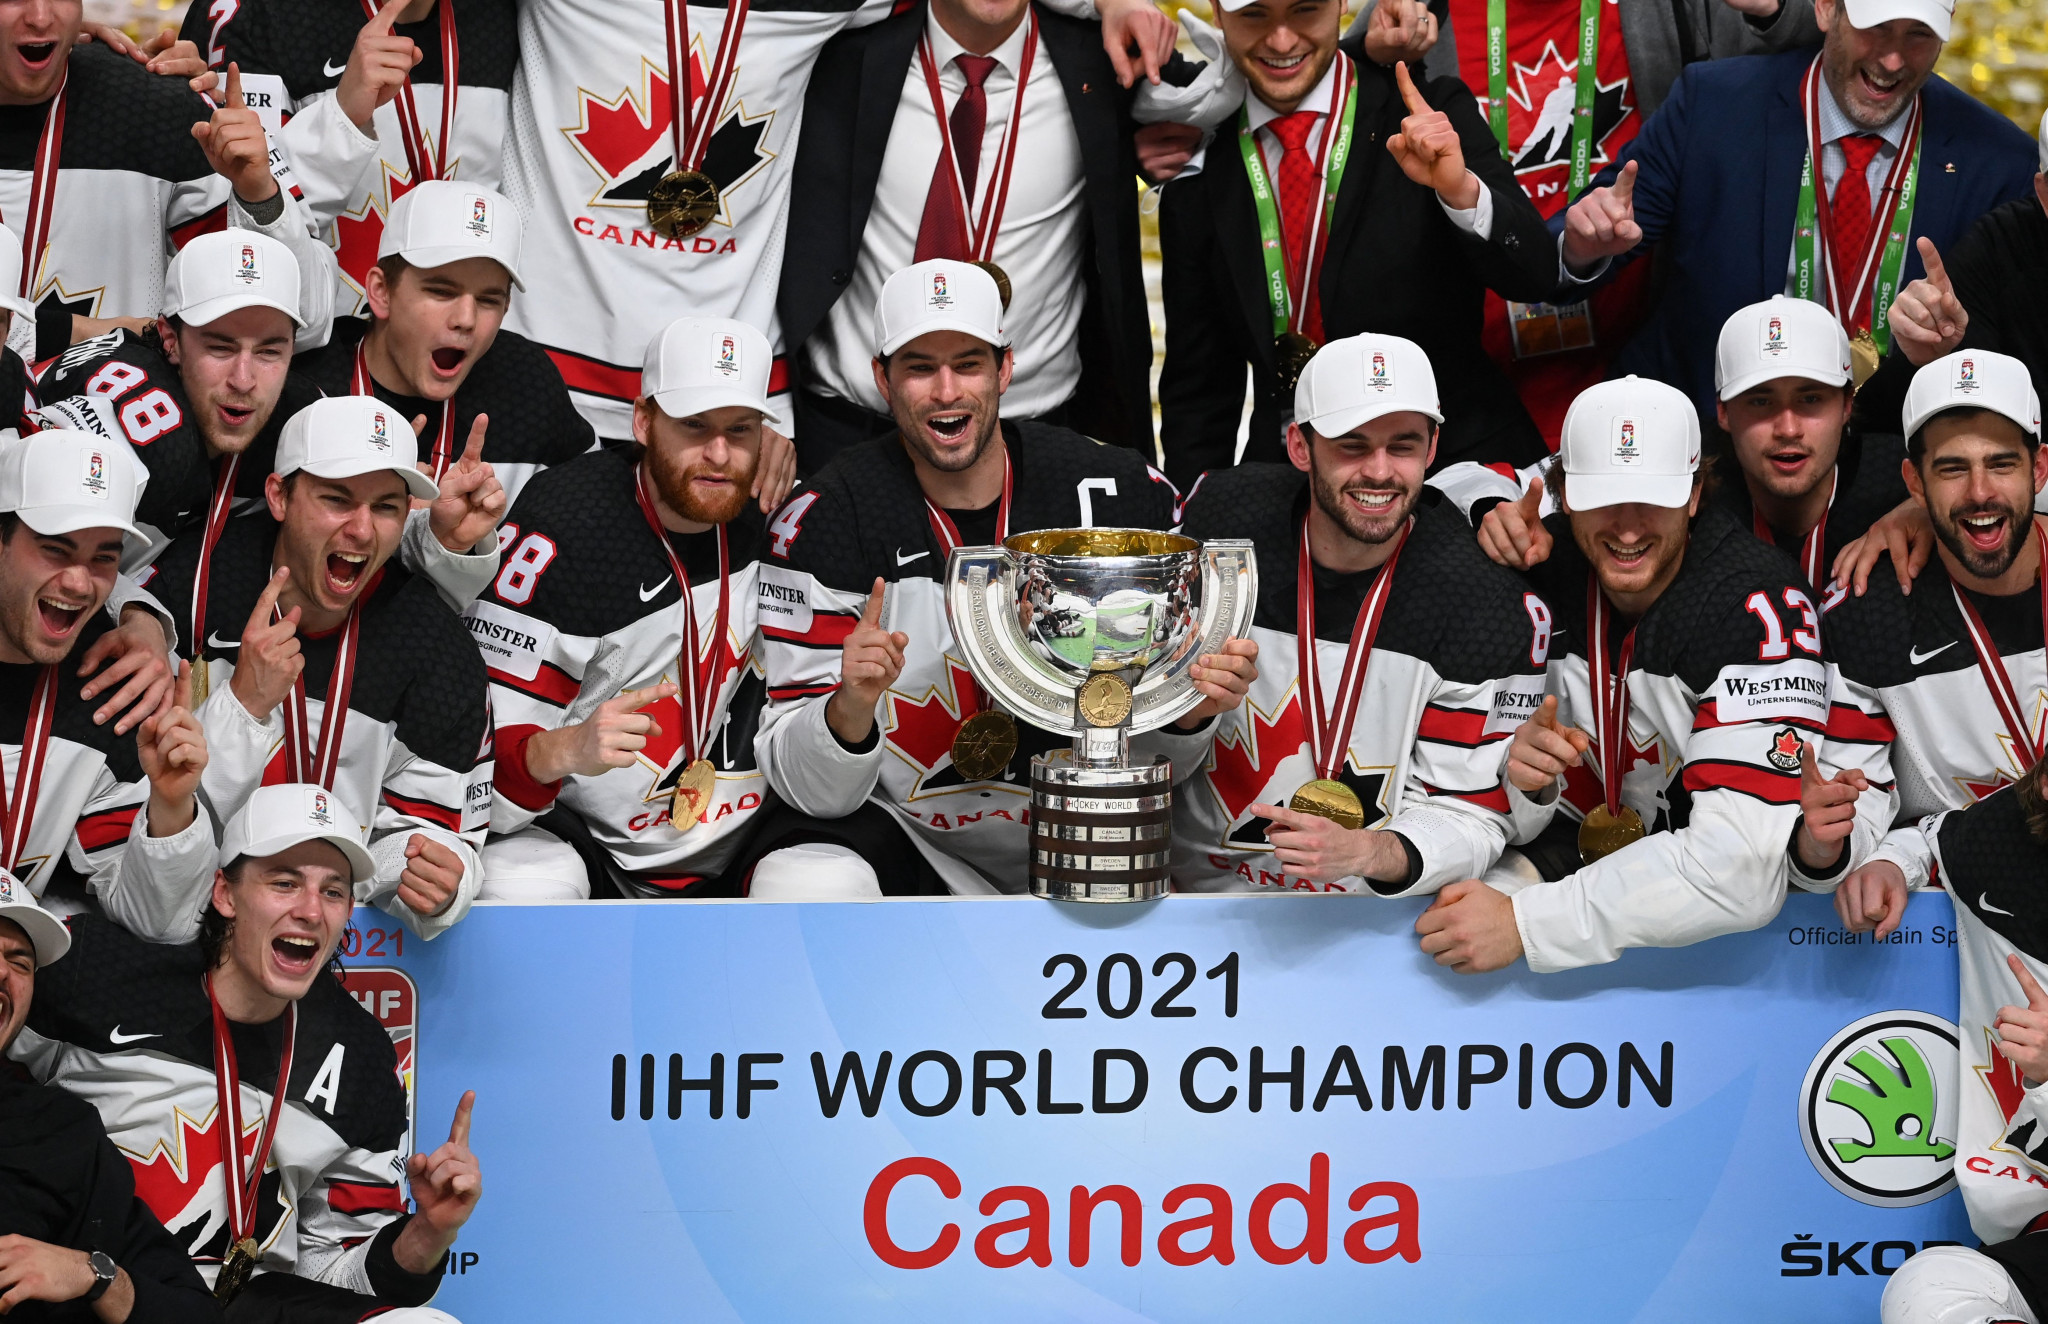 Canada will be aiming to capture a 28th world title after winning last year's edition with victory over Finland ©Getty Images